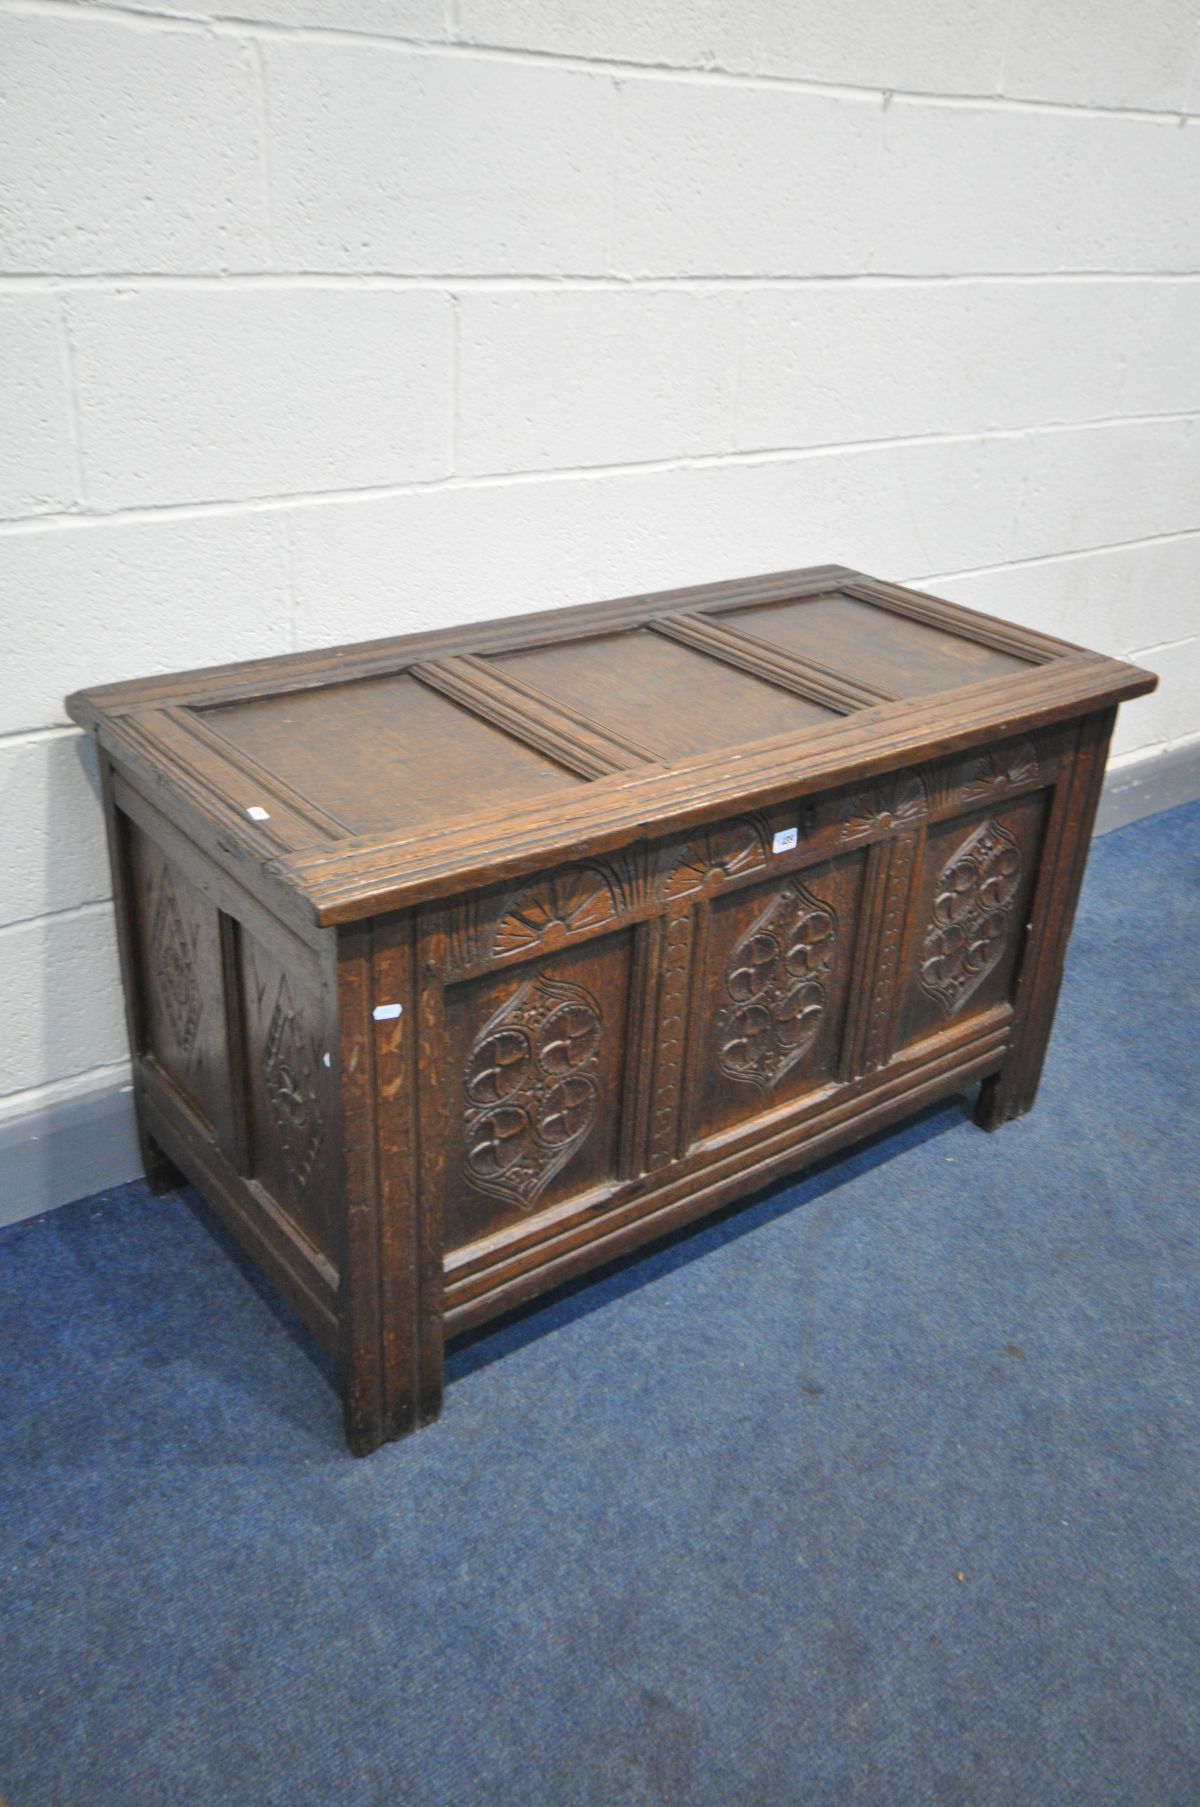 A GEORGIAN OAK COFFER, with carved panels, width 120cm x depth 57cm x height 68cm - Image 2 of 3